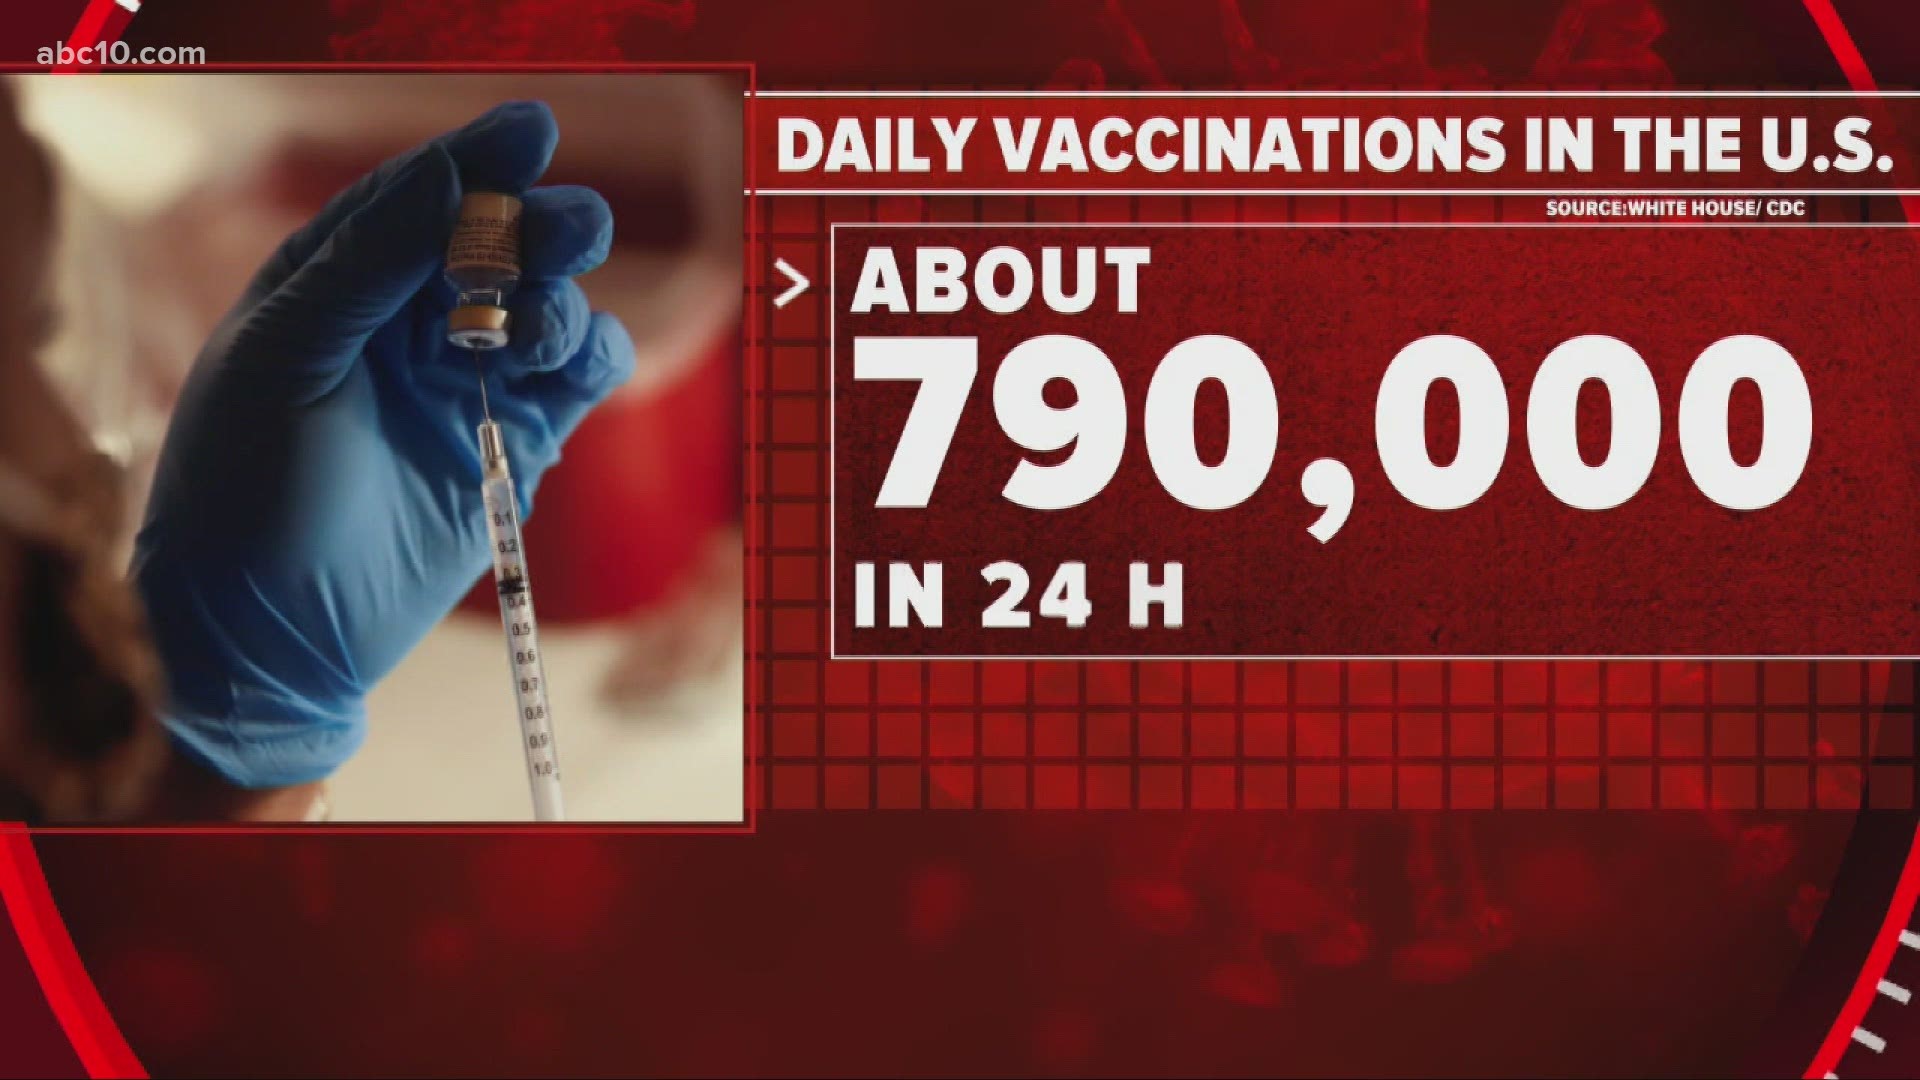 The most vaccines in a 24-hour period in the past three weeks were administered over the weekend in the US.